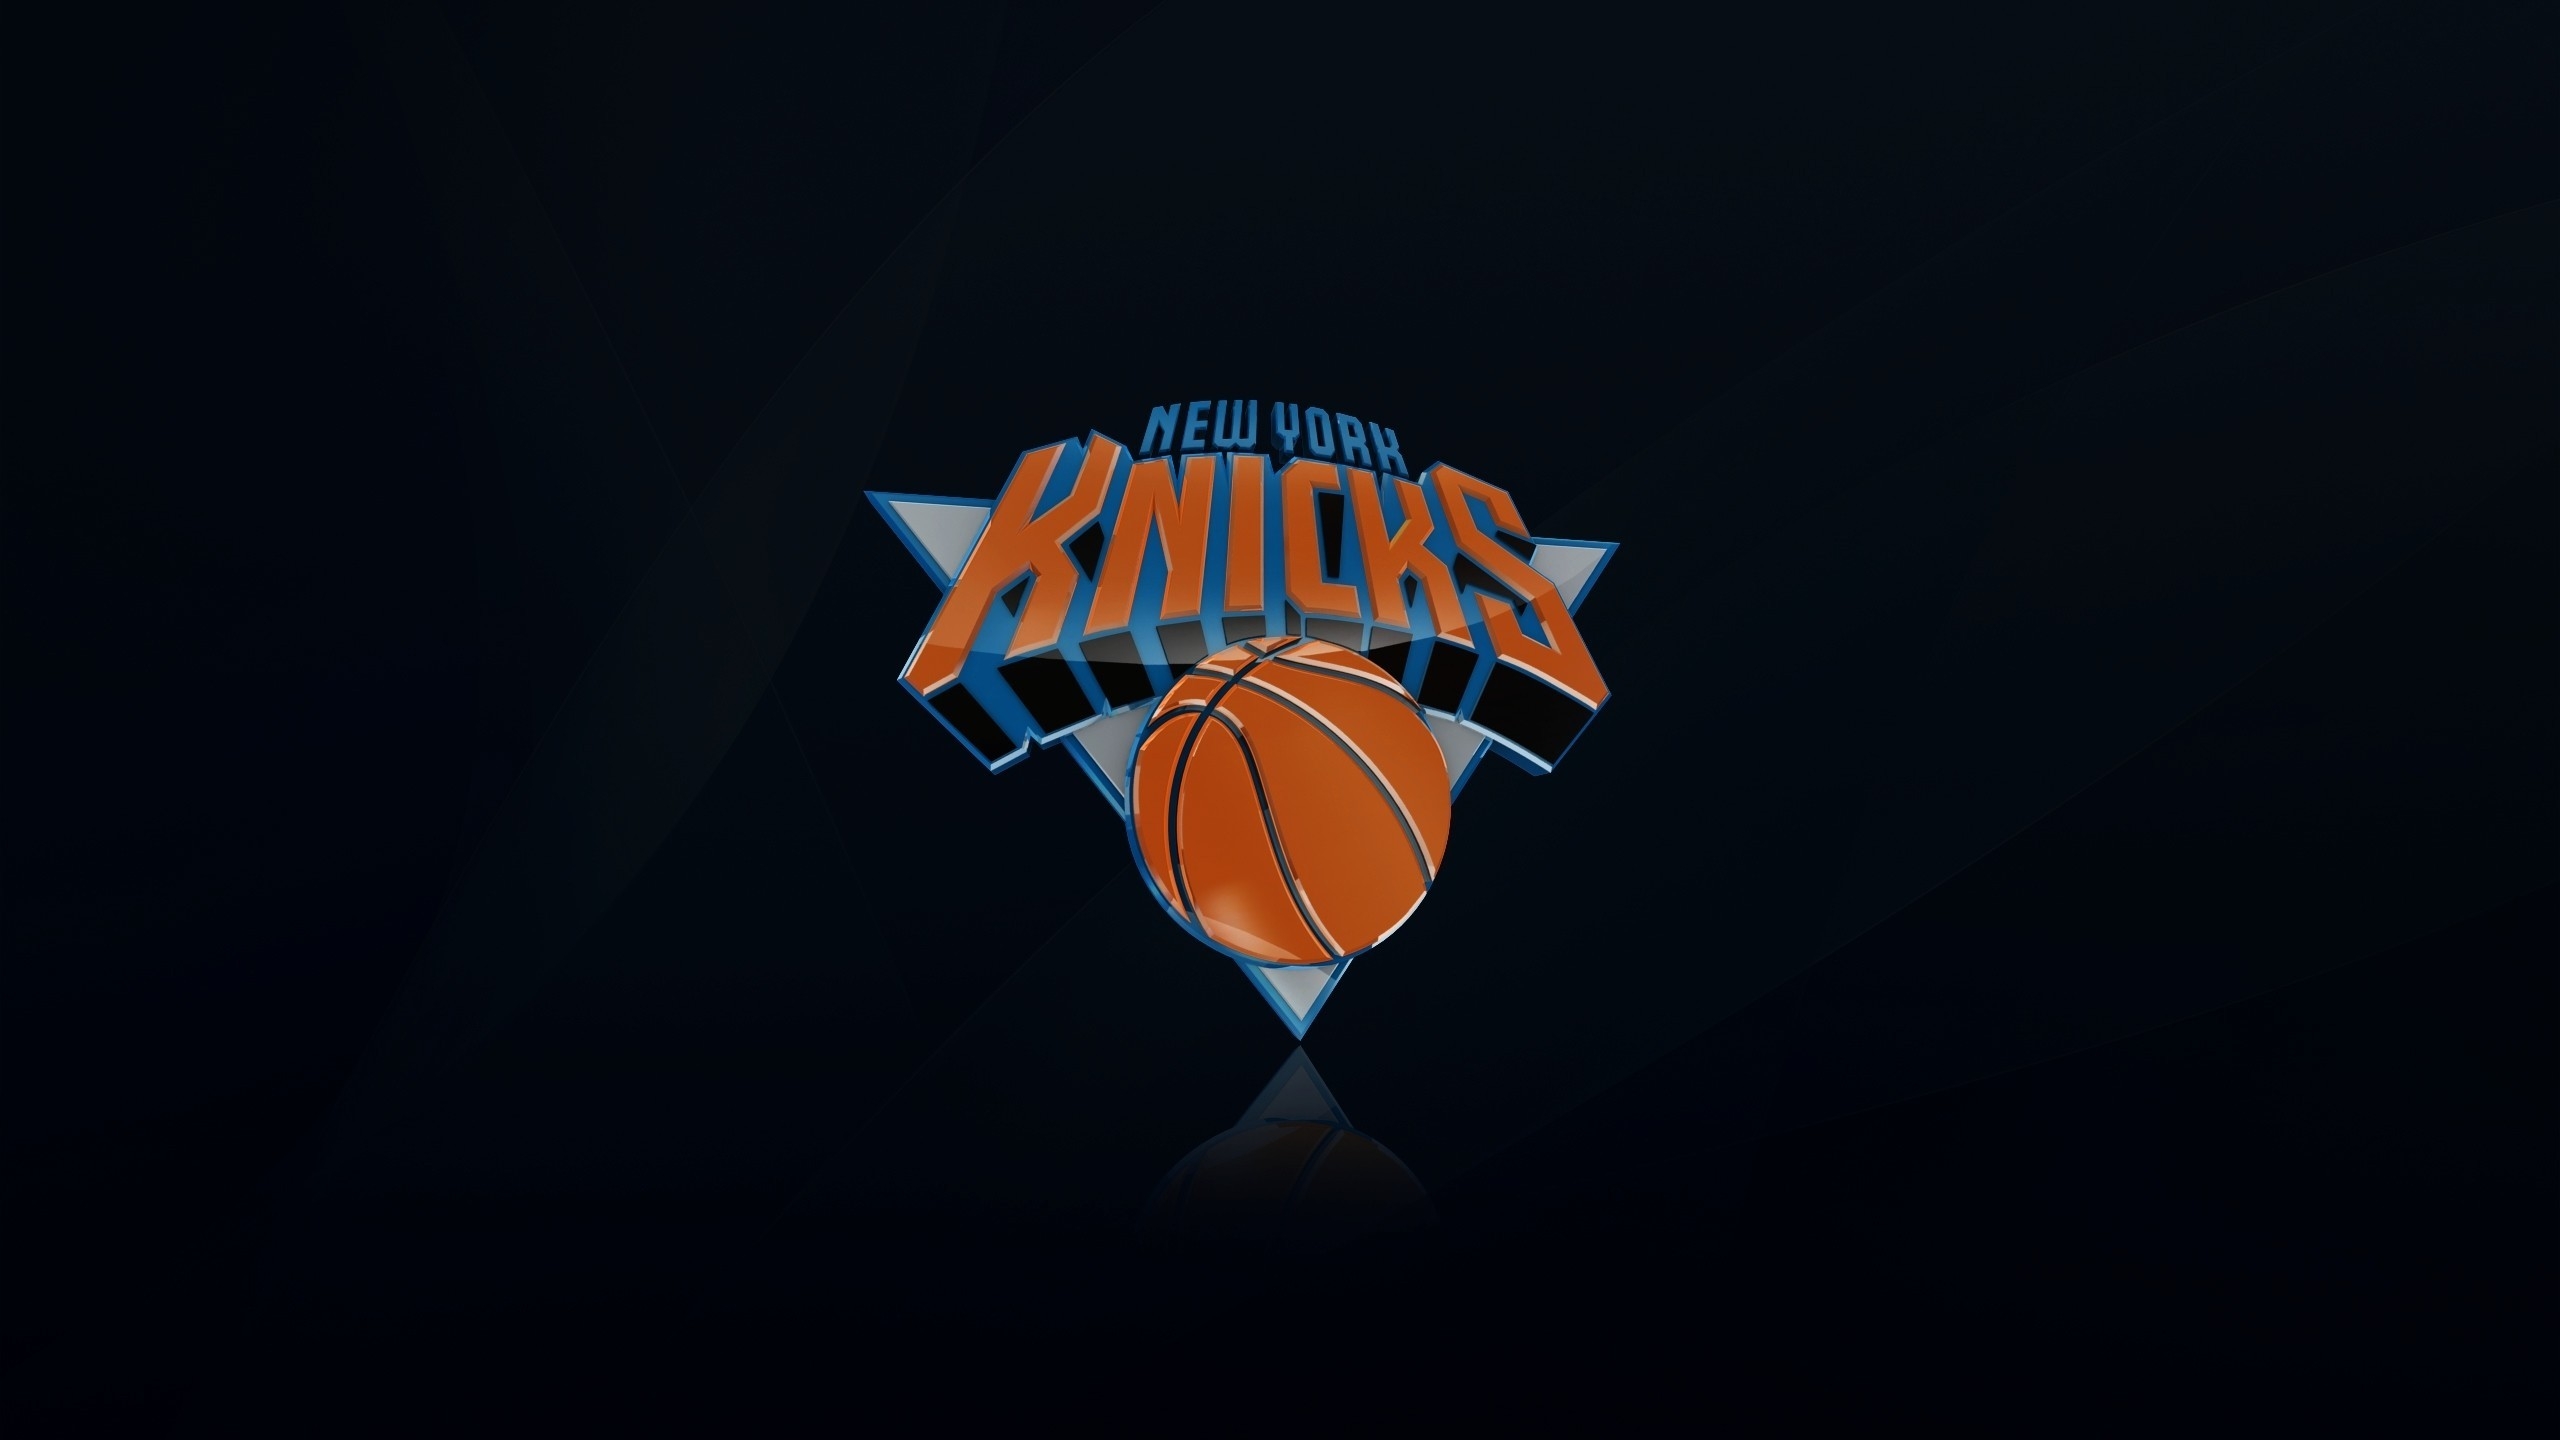 The New York Knickerbockers for 2560x1440 HDTV resolution